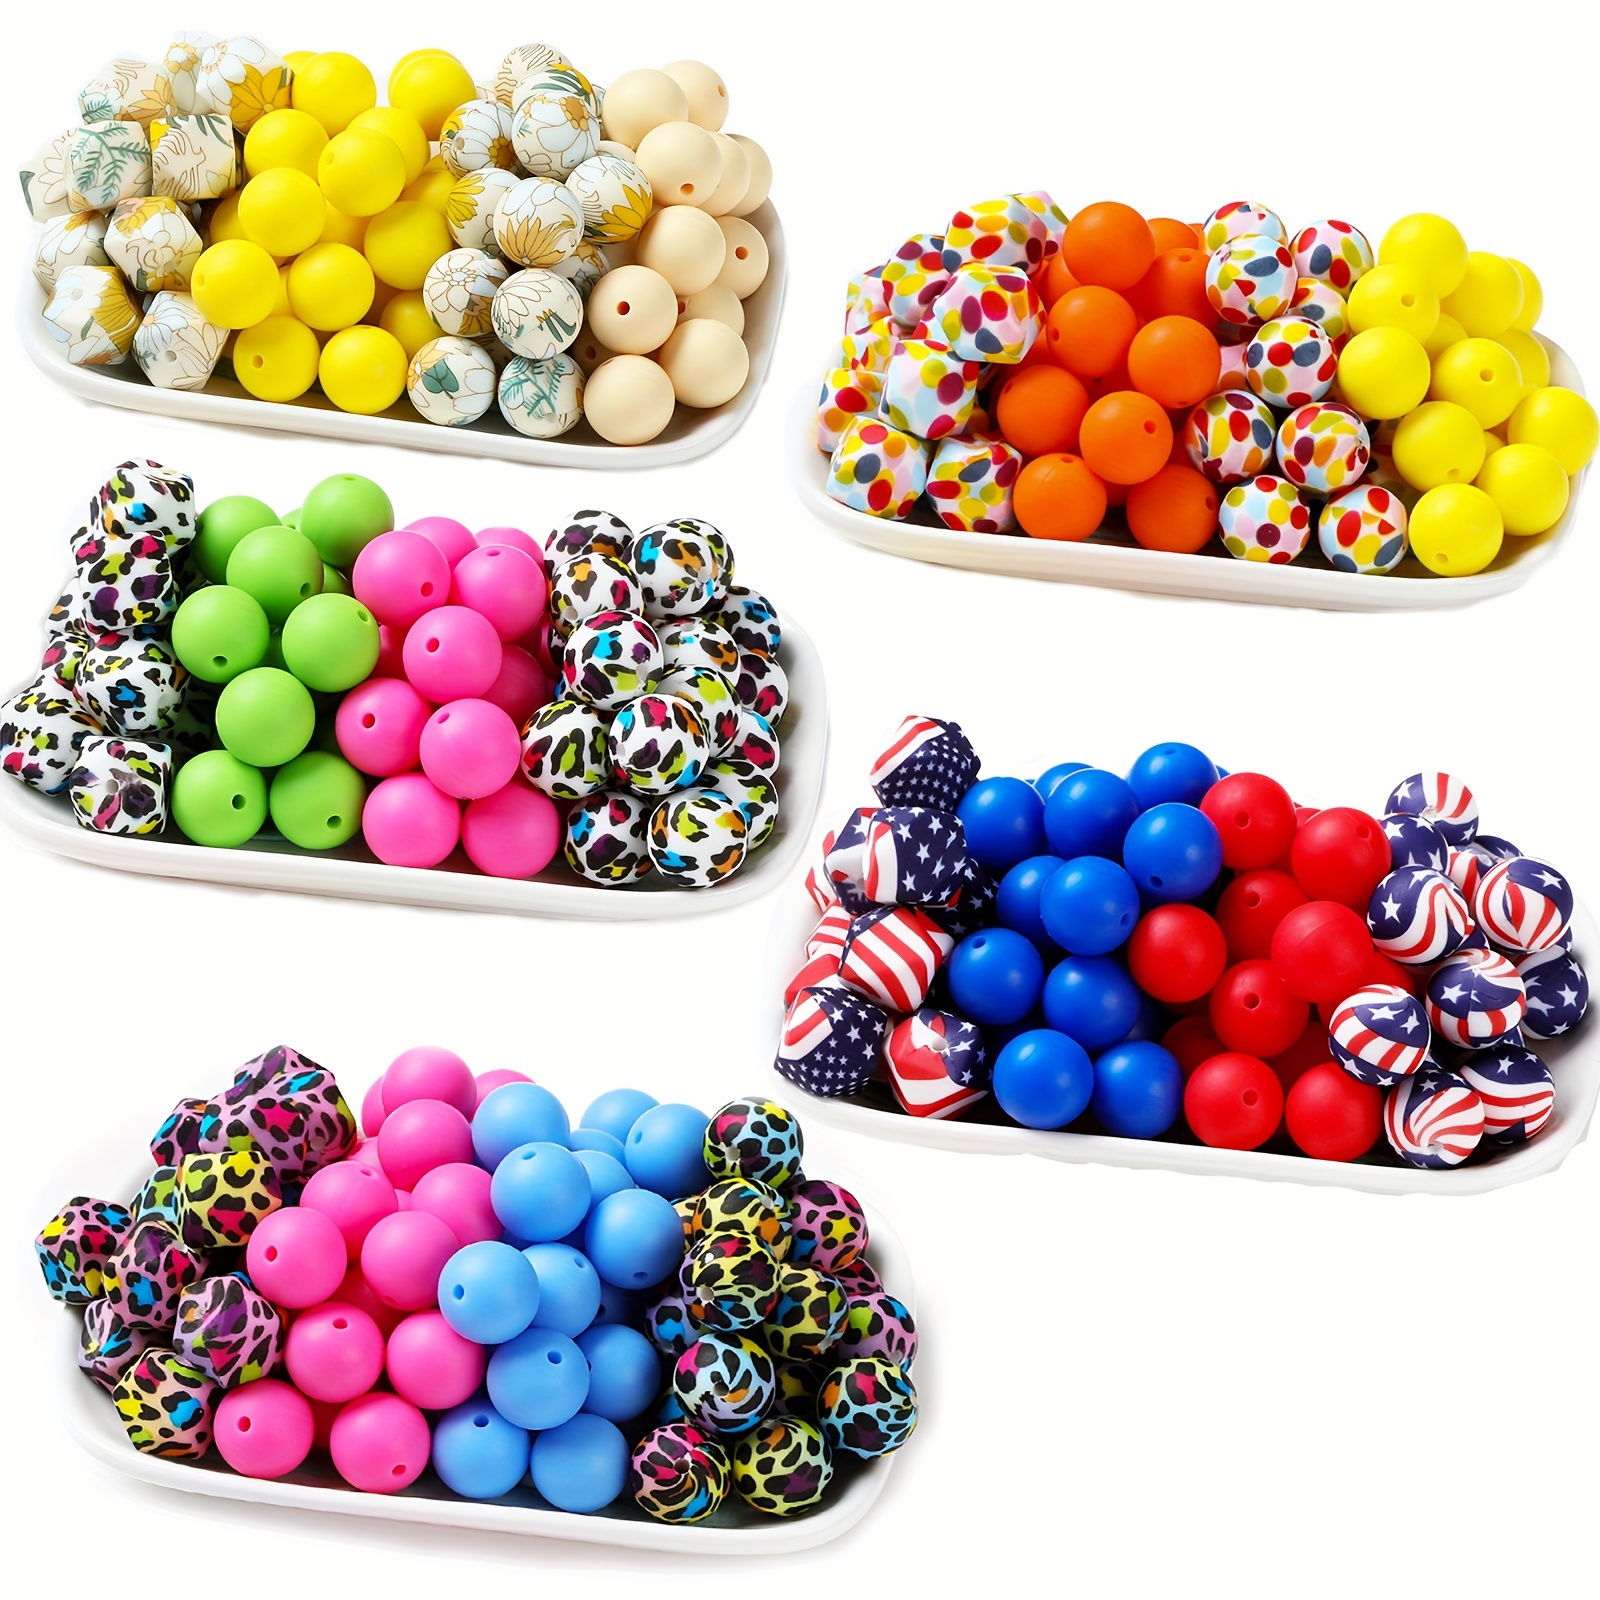 

40pcs 15mm Hexagonal Silicone Solid Color Flower Pattern Round Loose Bead Jewelry Making Diy Fashion Key Bag Chain Pen Decorative Bracelet Necklace Hanging Beaded Craft Supplies